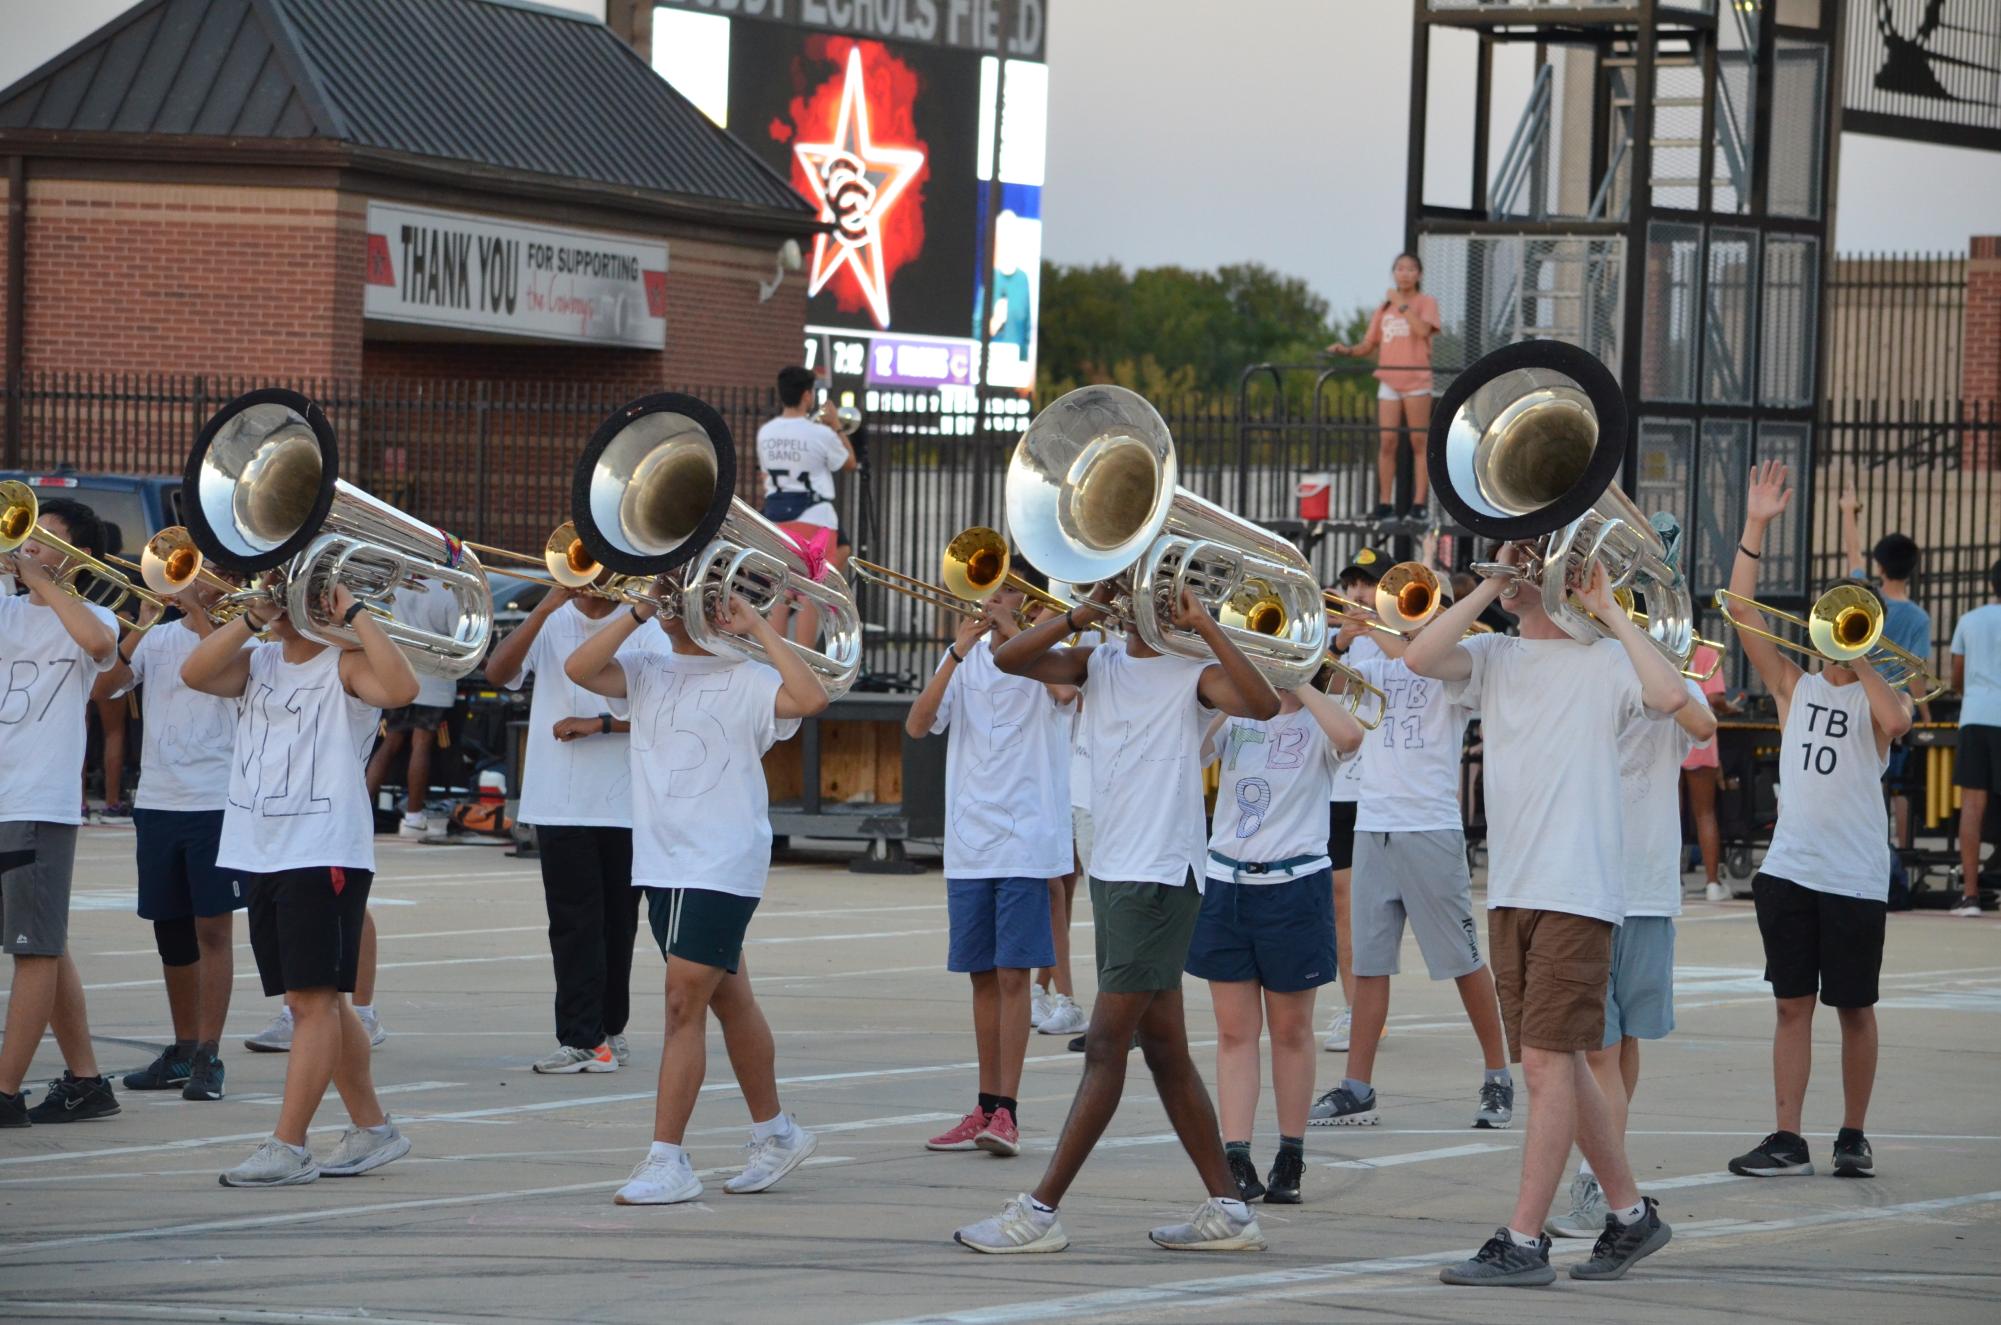 The Coppell High School Band practices in the CHS parking lot on Sept. 7 with temperatures hitting 104 degrees. High temperatures have hit Coppell throughout the summer. Namir Awan